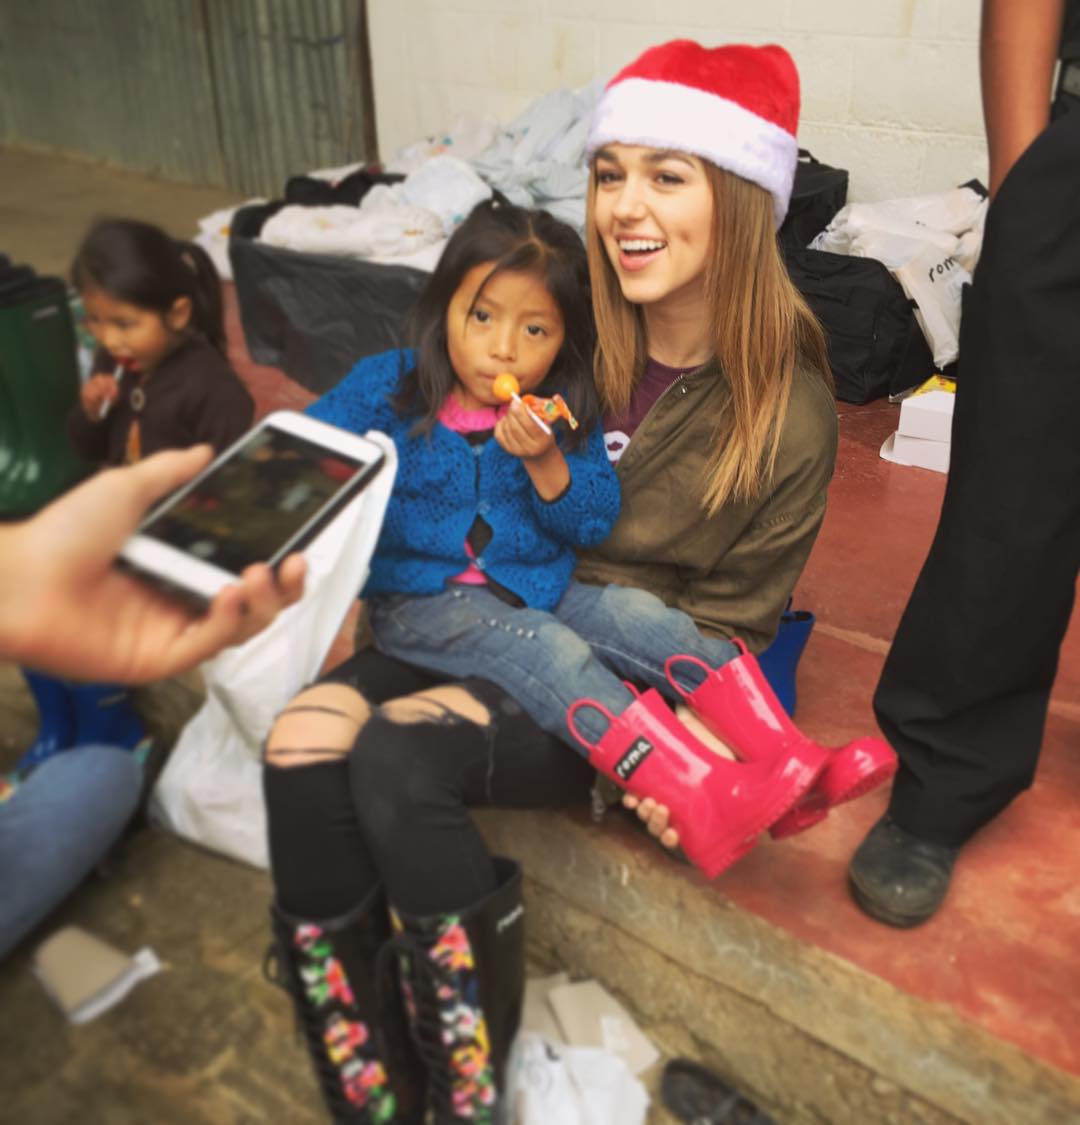 Sadie Robertson visited Guatemala in late 2015 to provide rain boots to children in need.